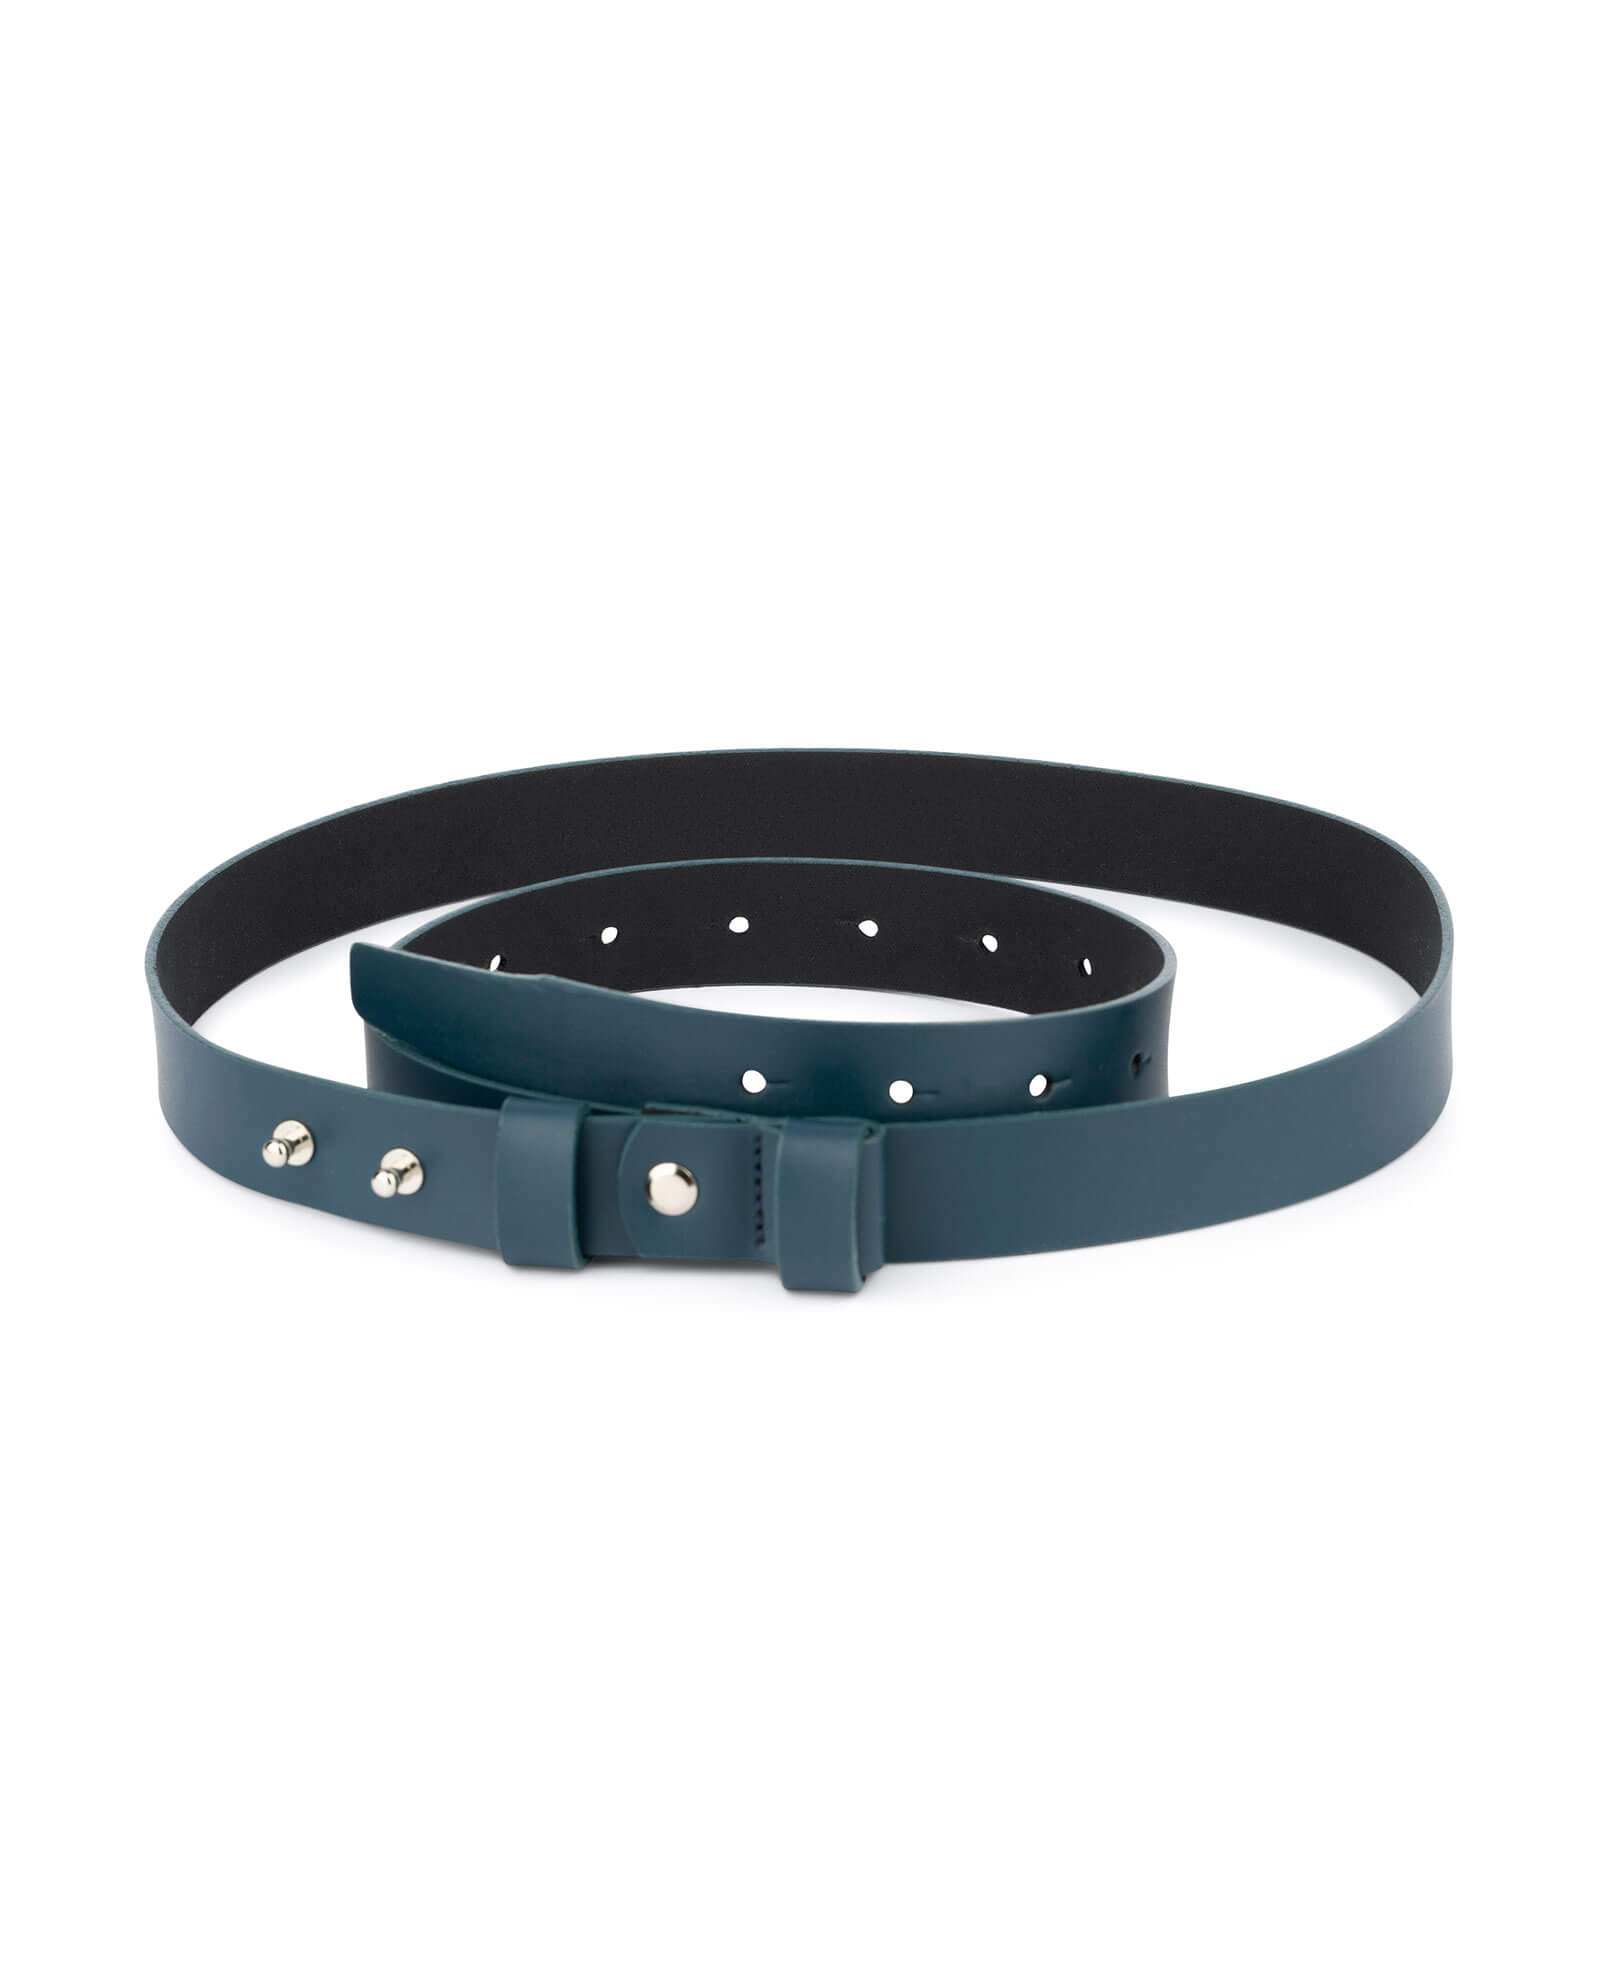 Buy 1 Inch Womens Blue Belt Without Buckle | Capo Pelle